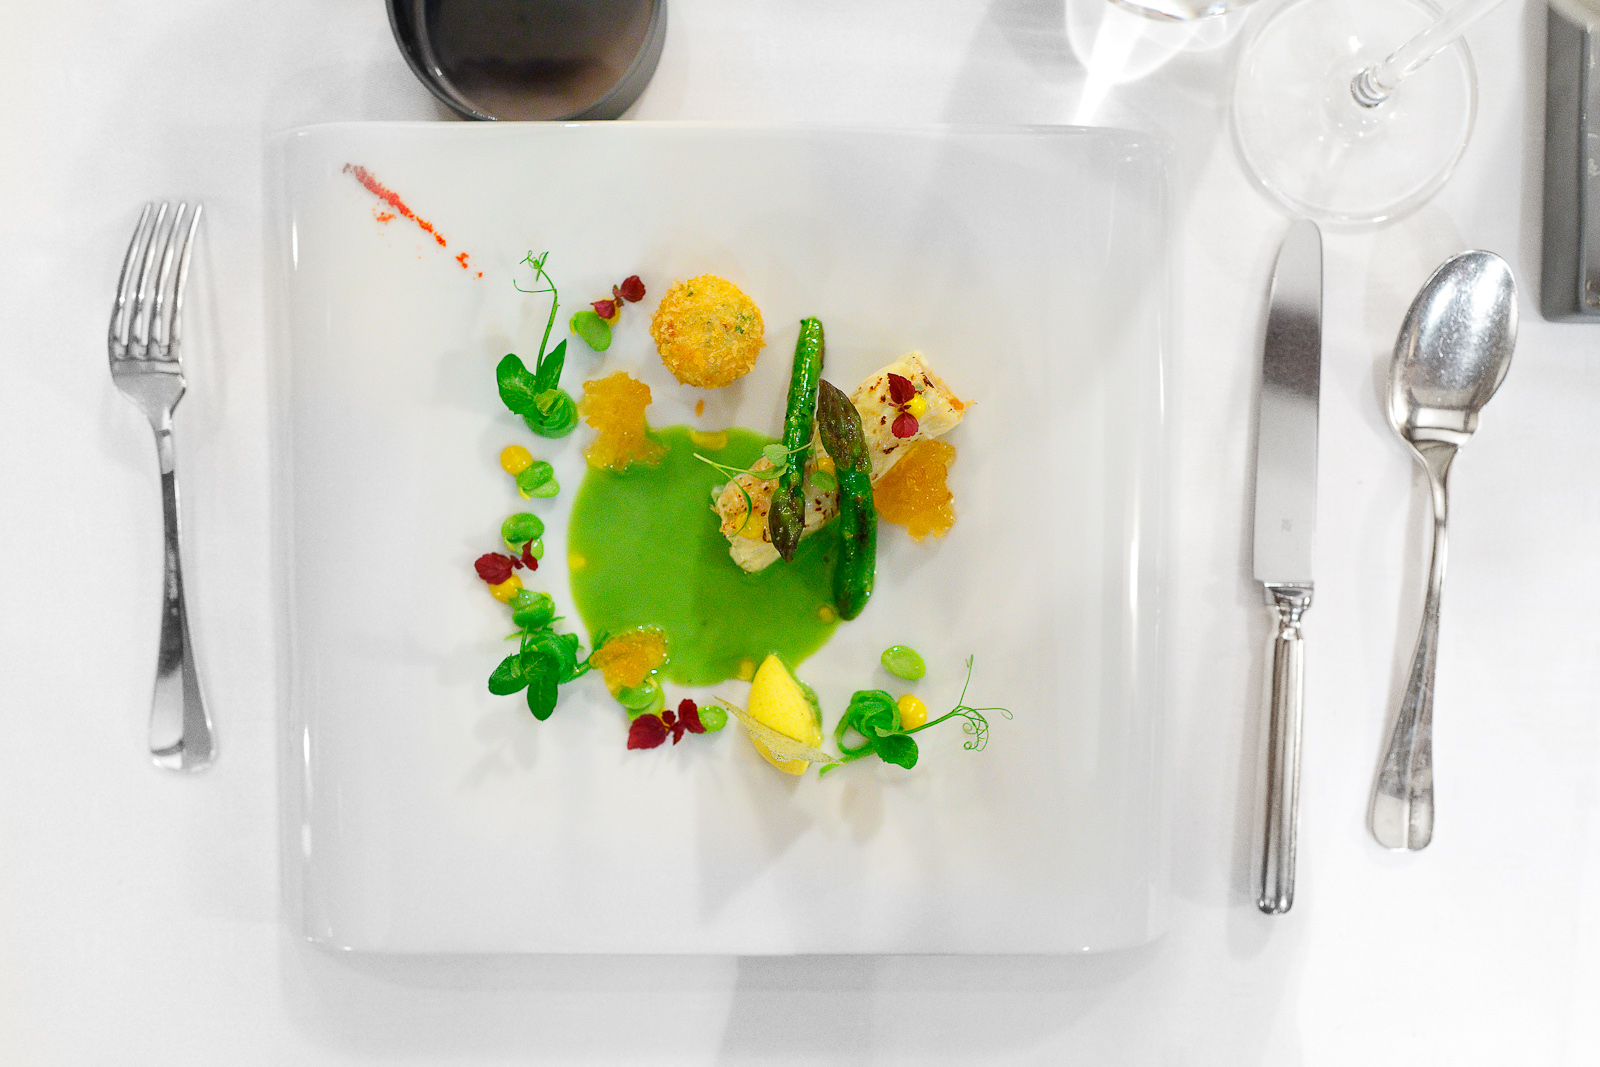 2nd Course: "Sea spider" - Milk skin, green vegetable juice, curry, chrysanthemums